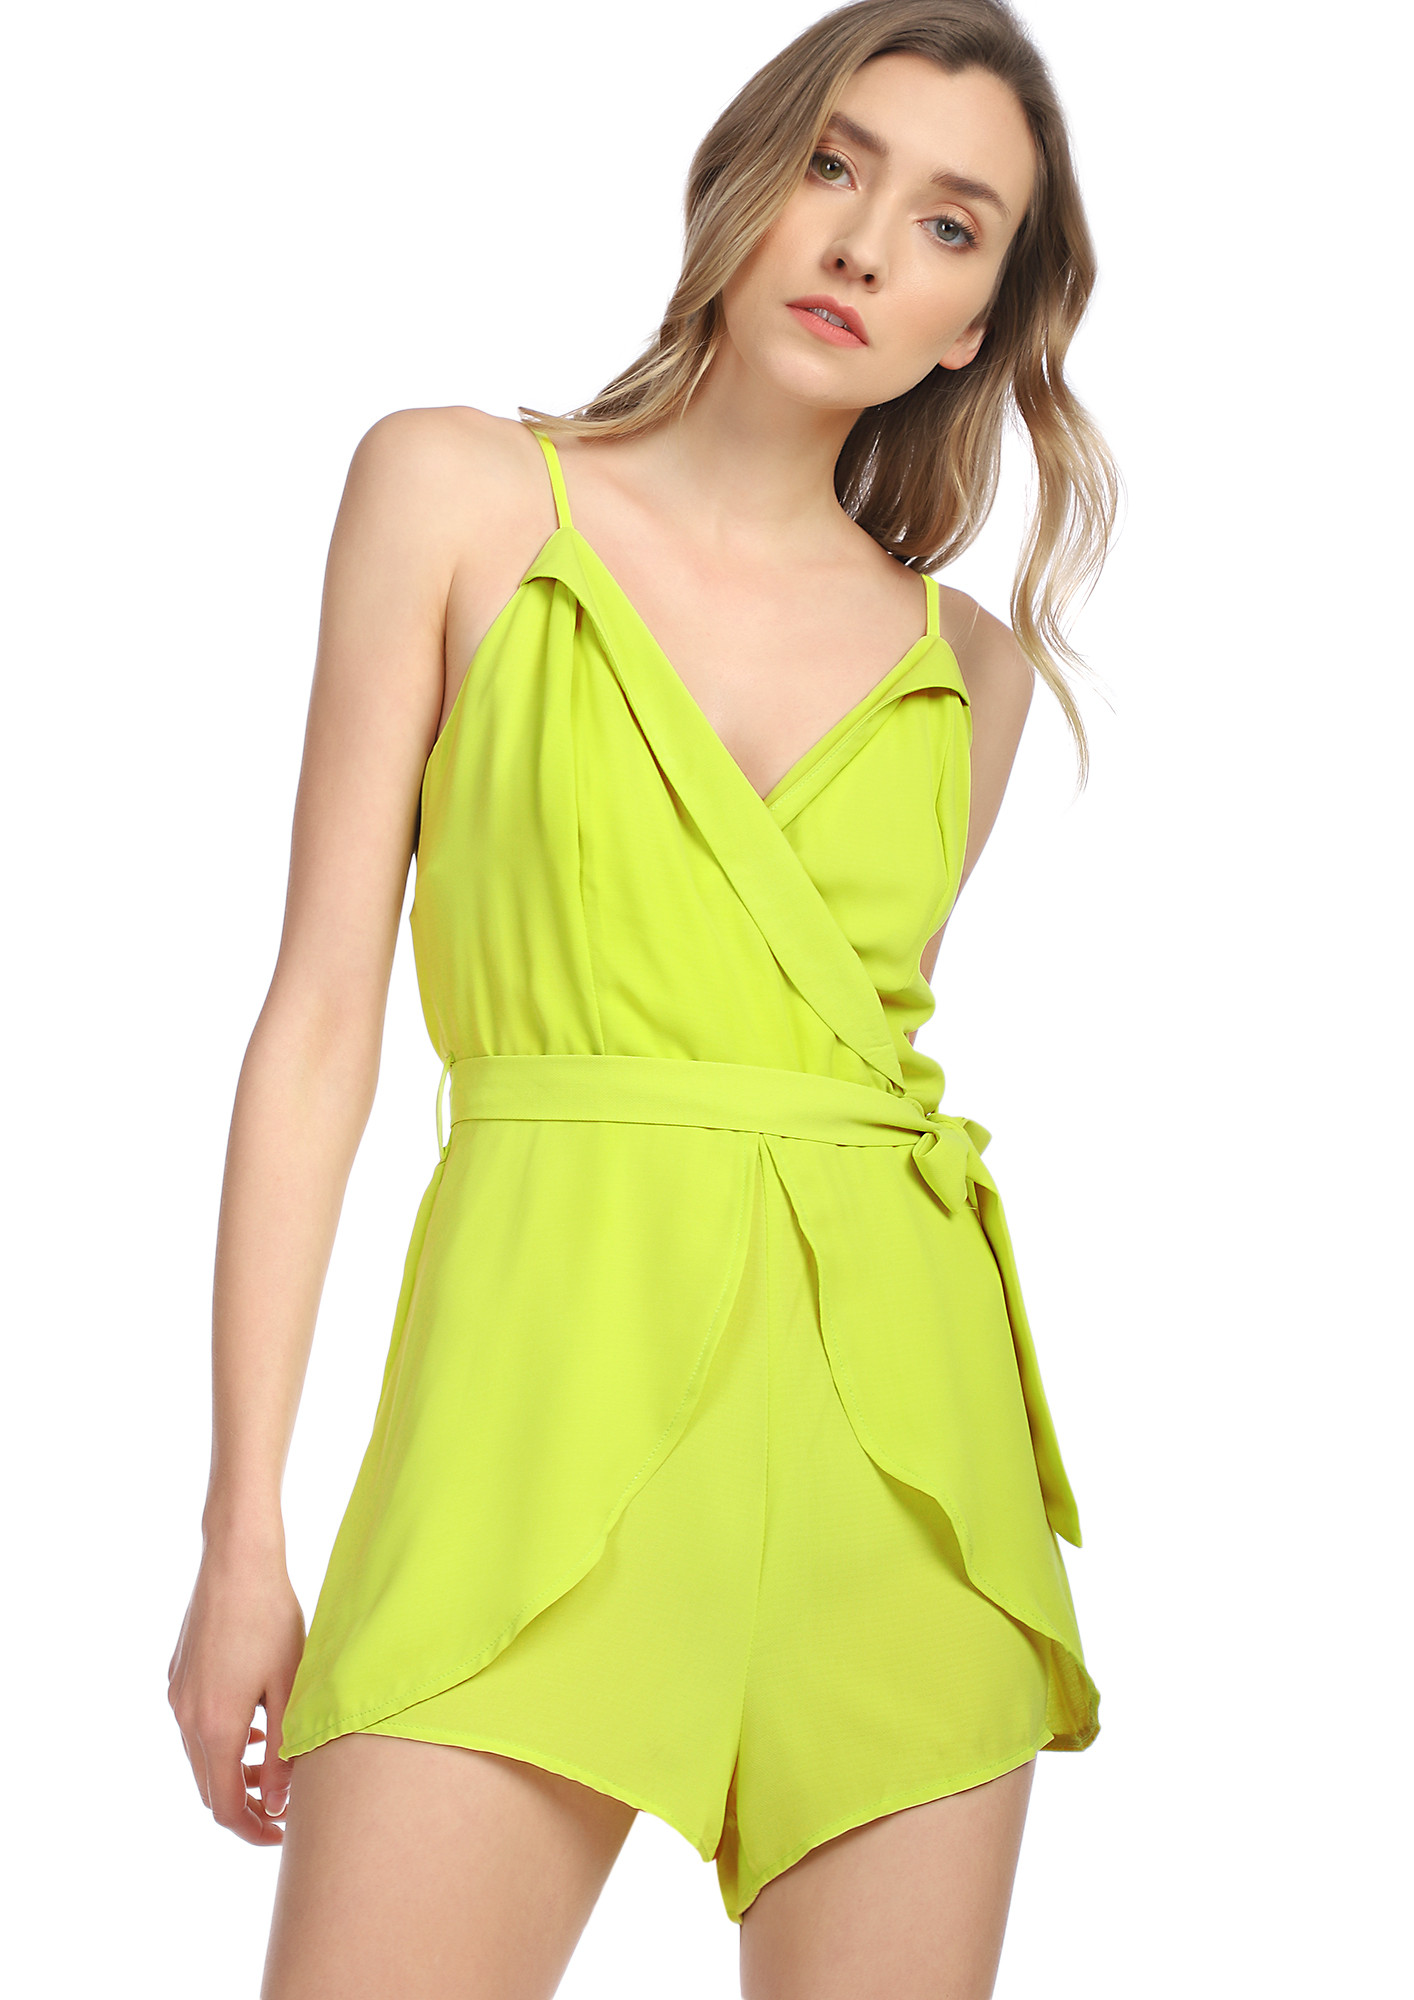 BRING ON SOME FUN LIME YELLOW ROMPER